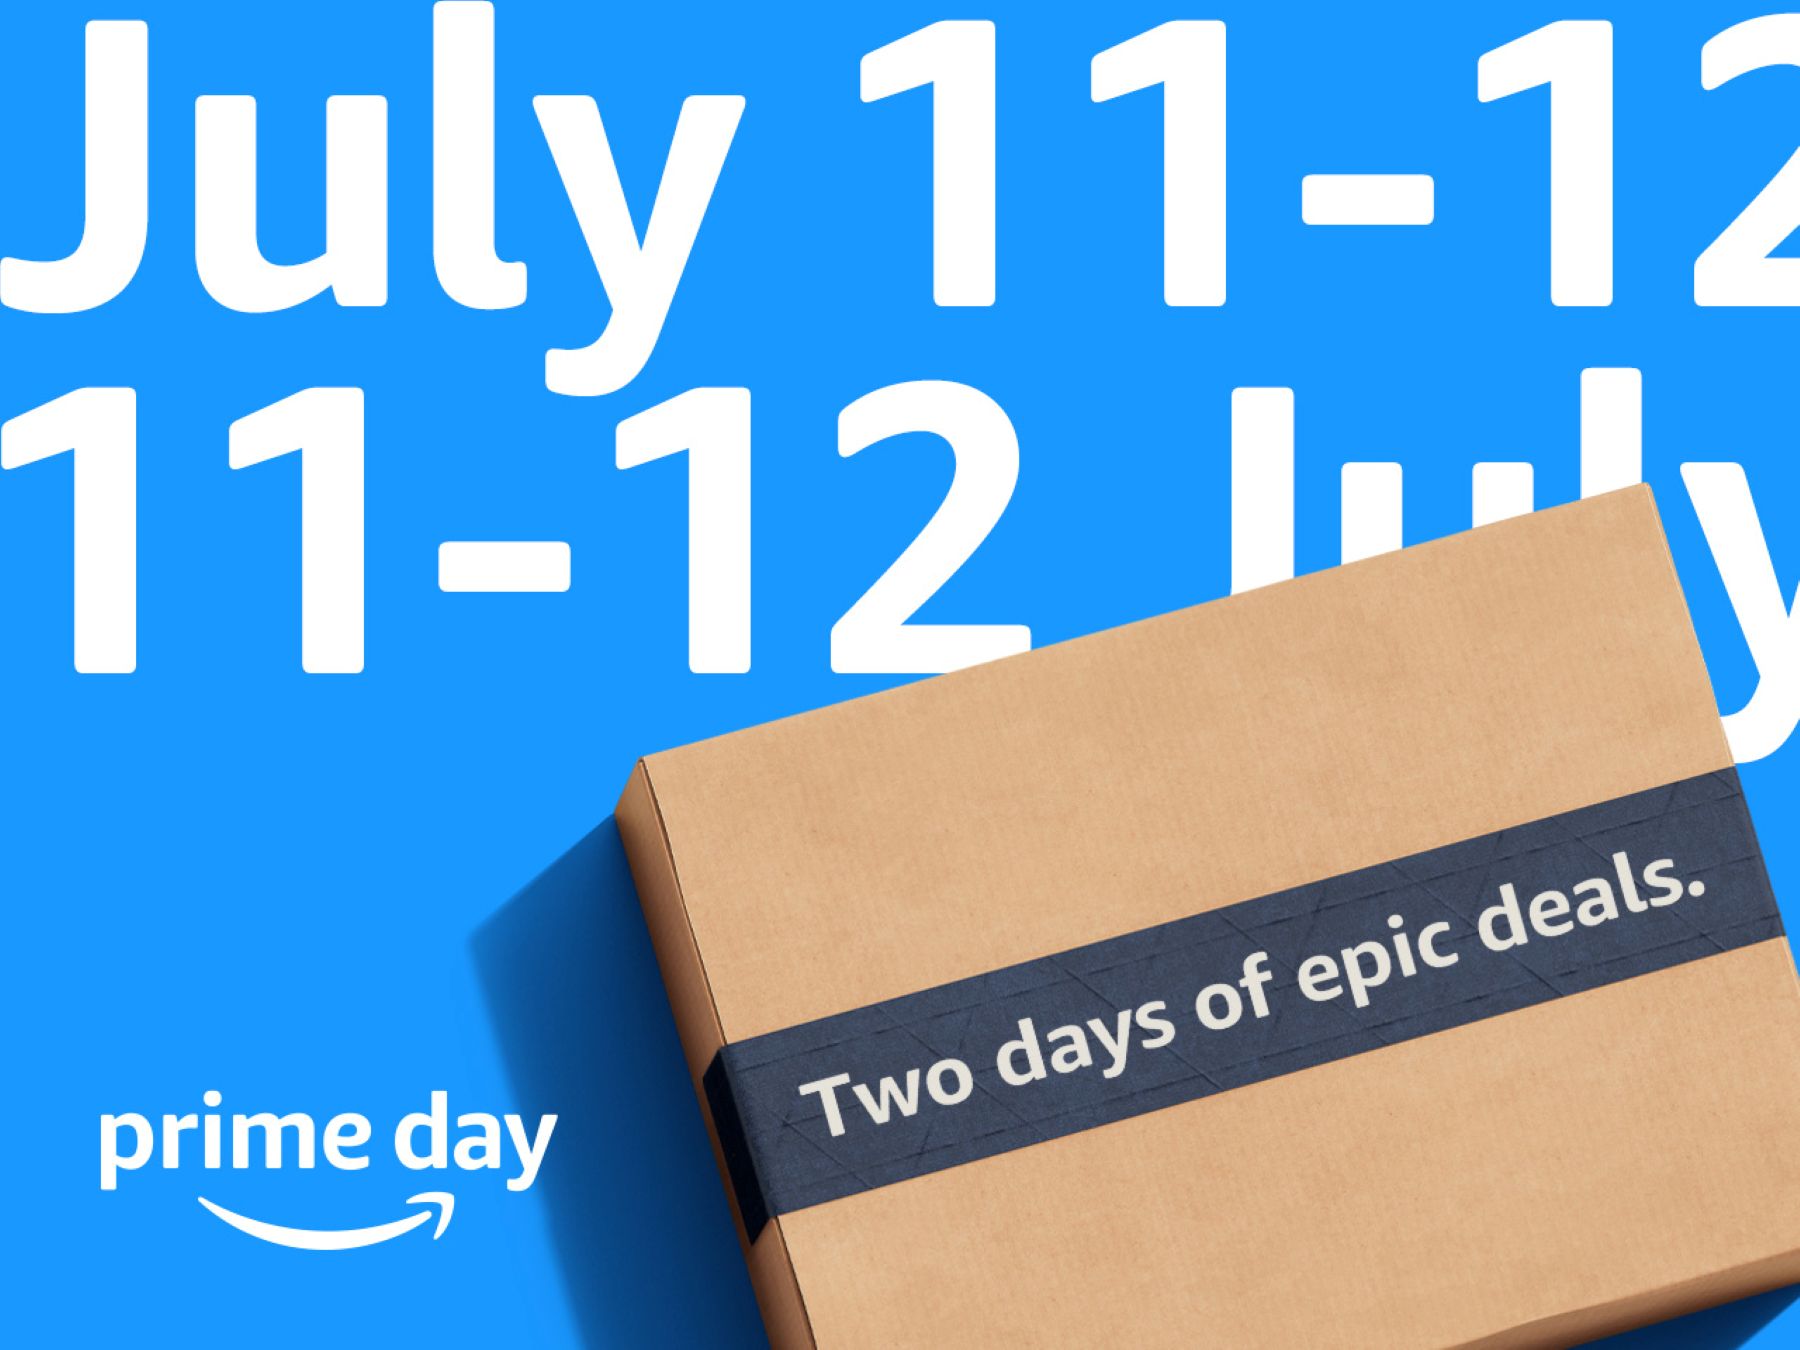 Amazon – First Day of Prime Day was the Single Largest Sales Day Ever on Amazon, Helping Make This the Biggest Prime Day Event Ever